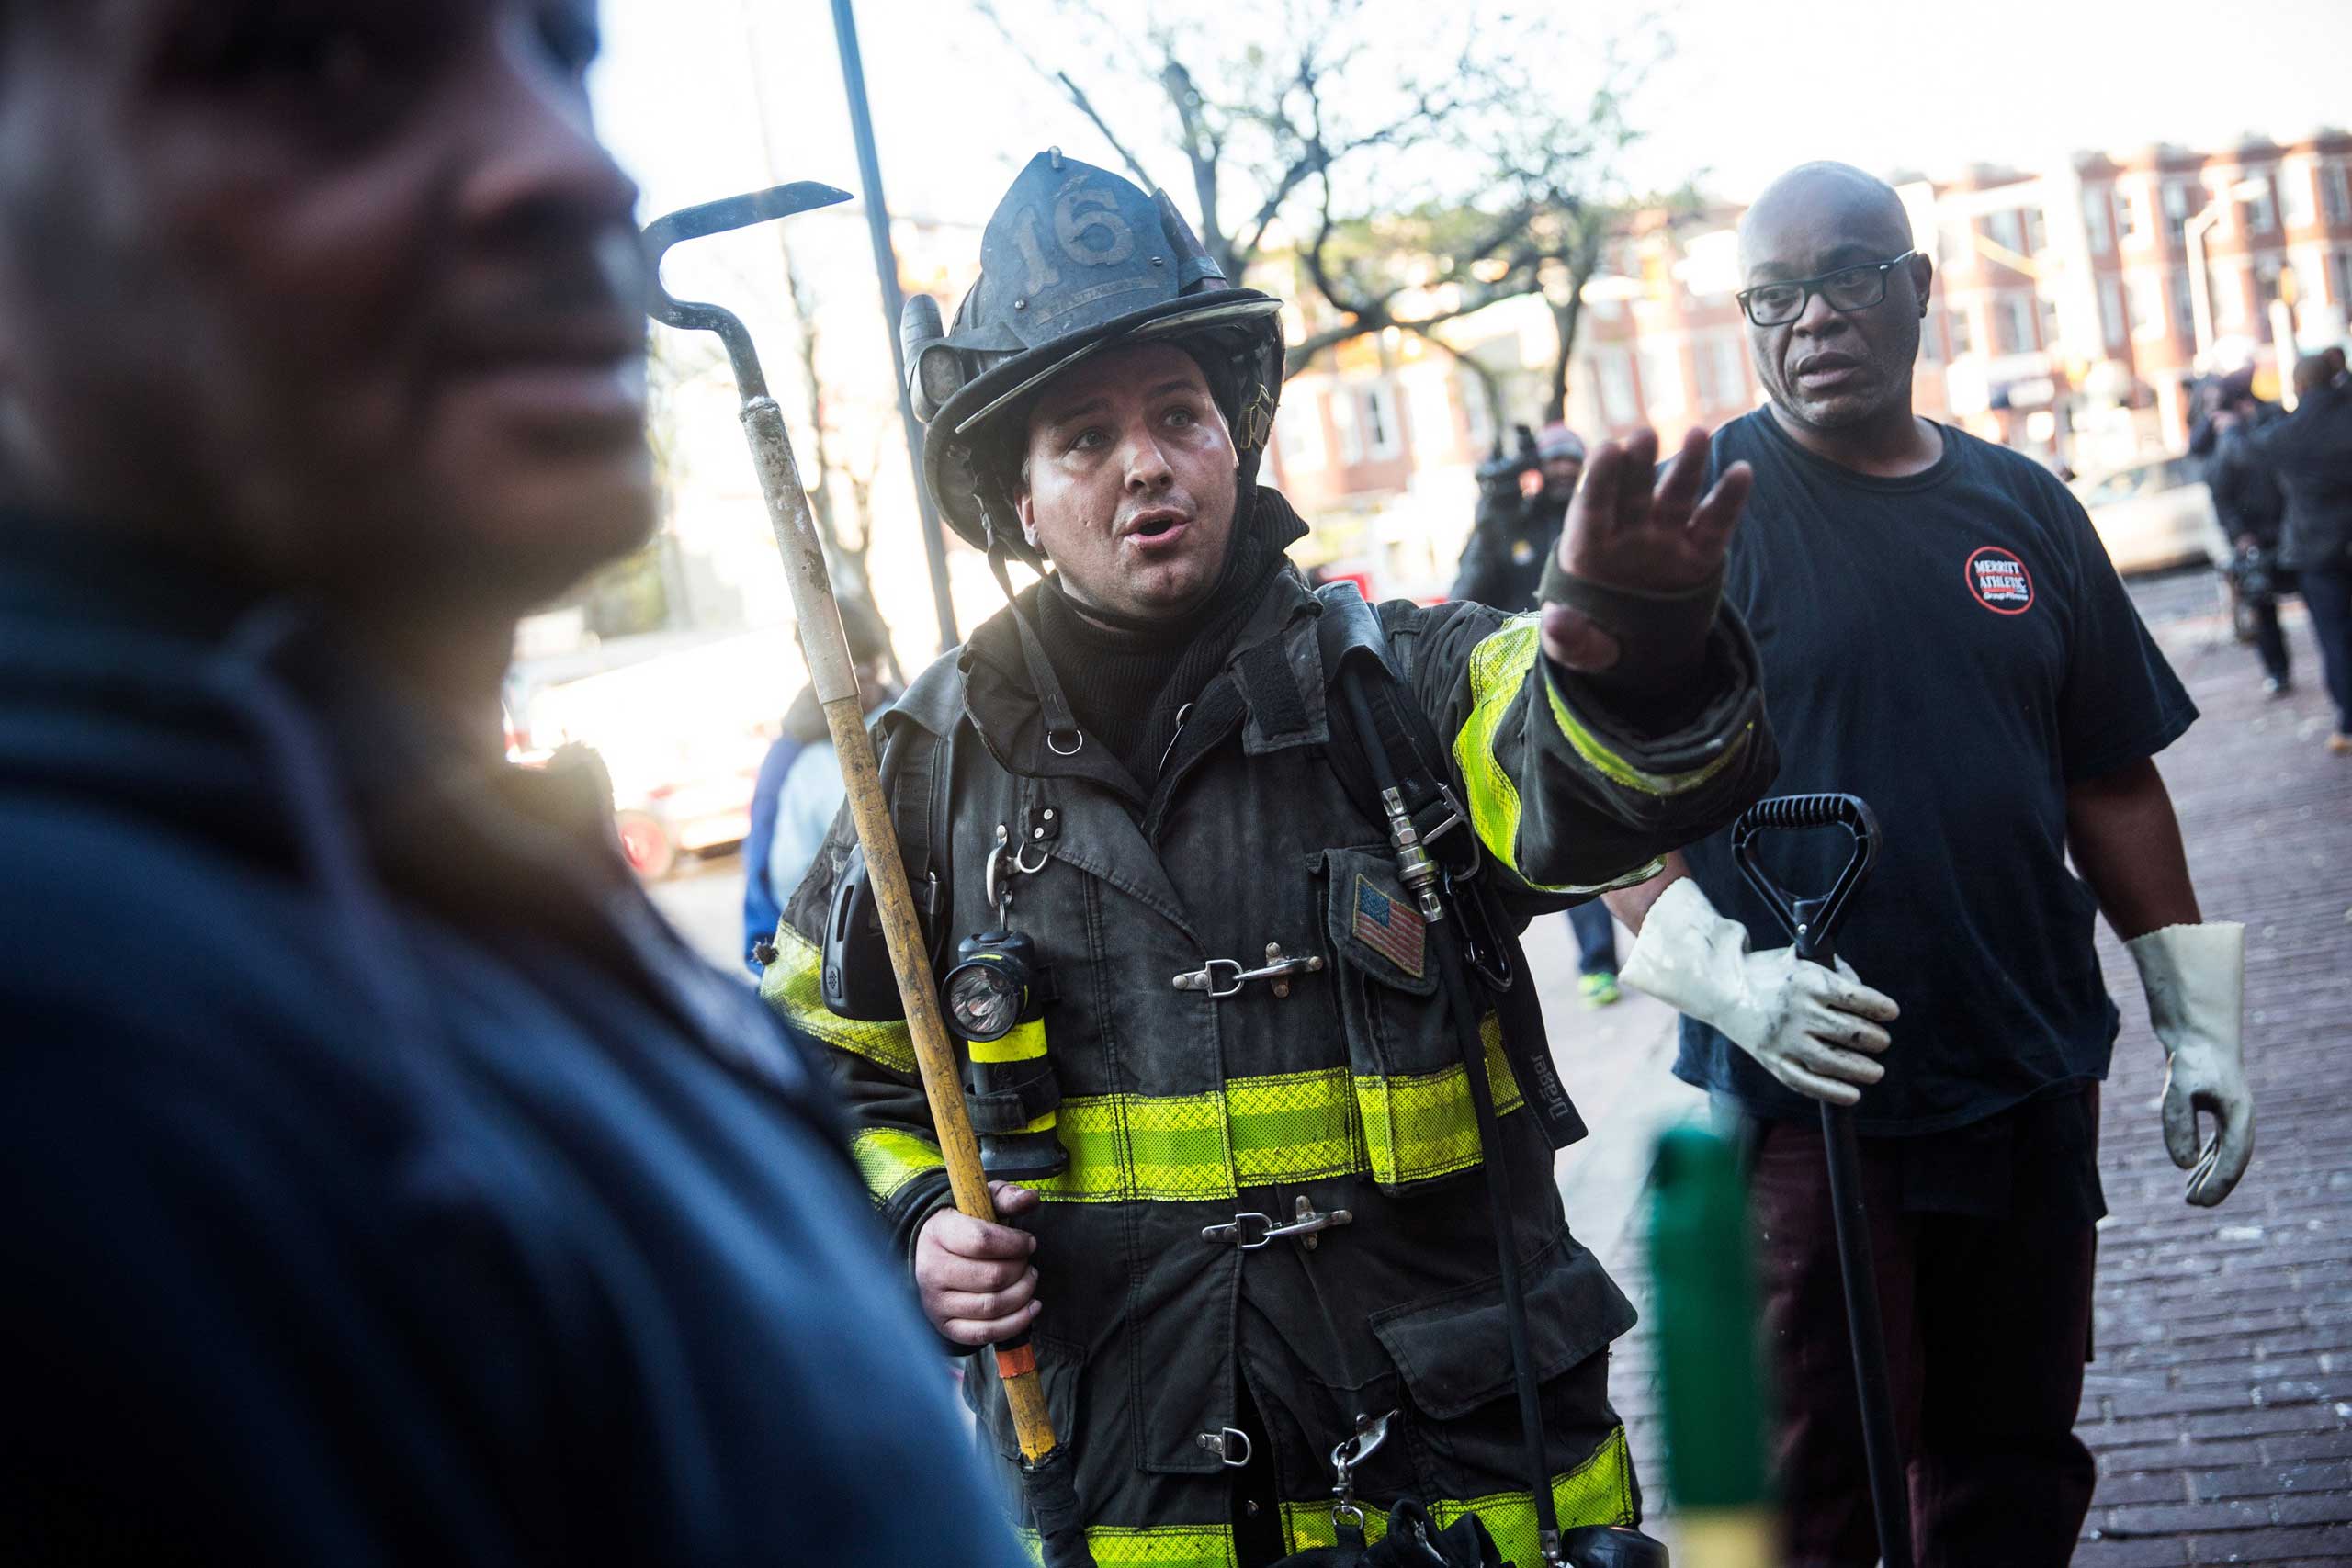 Baltimore firefighters talk to community members cleaning up a CVS pharmacy that was set on fire one day earlier during riots in Baltimore, April 28, 2015.